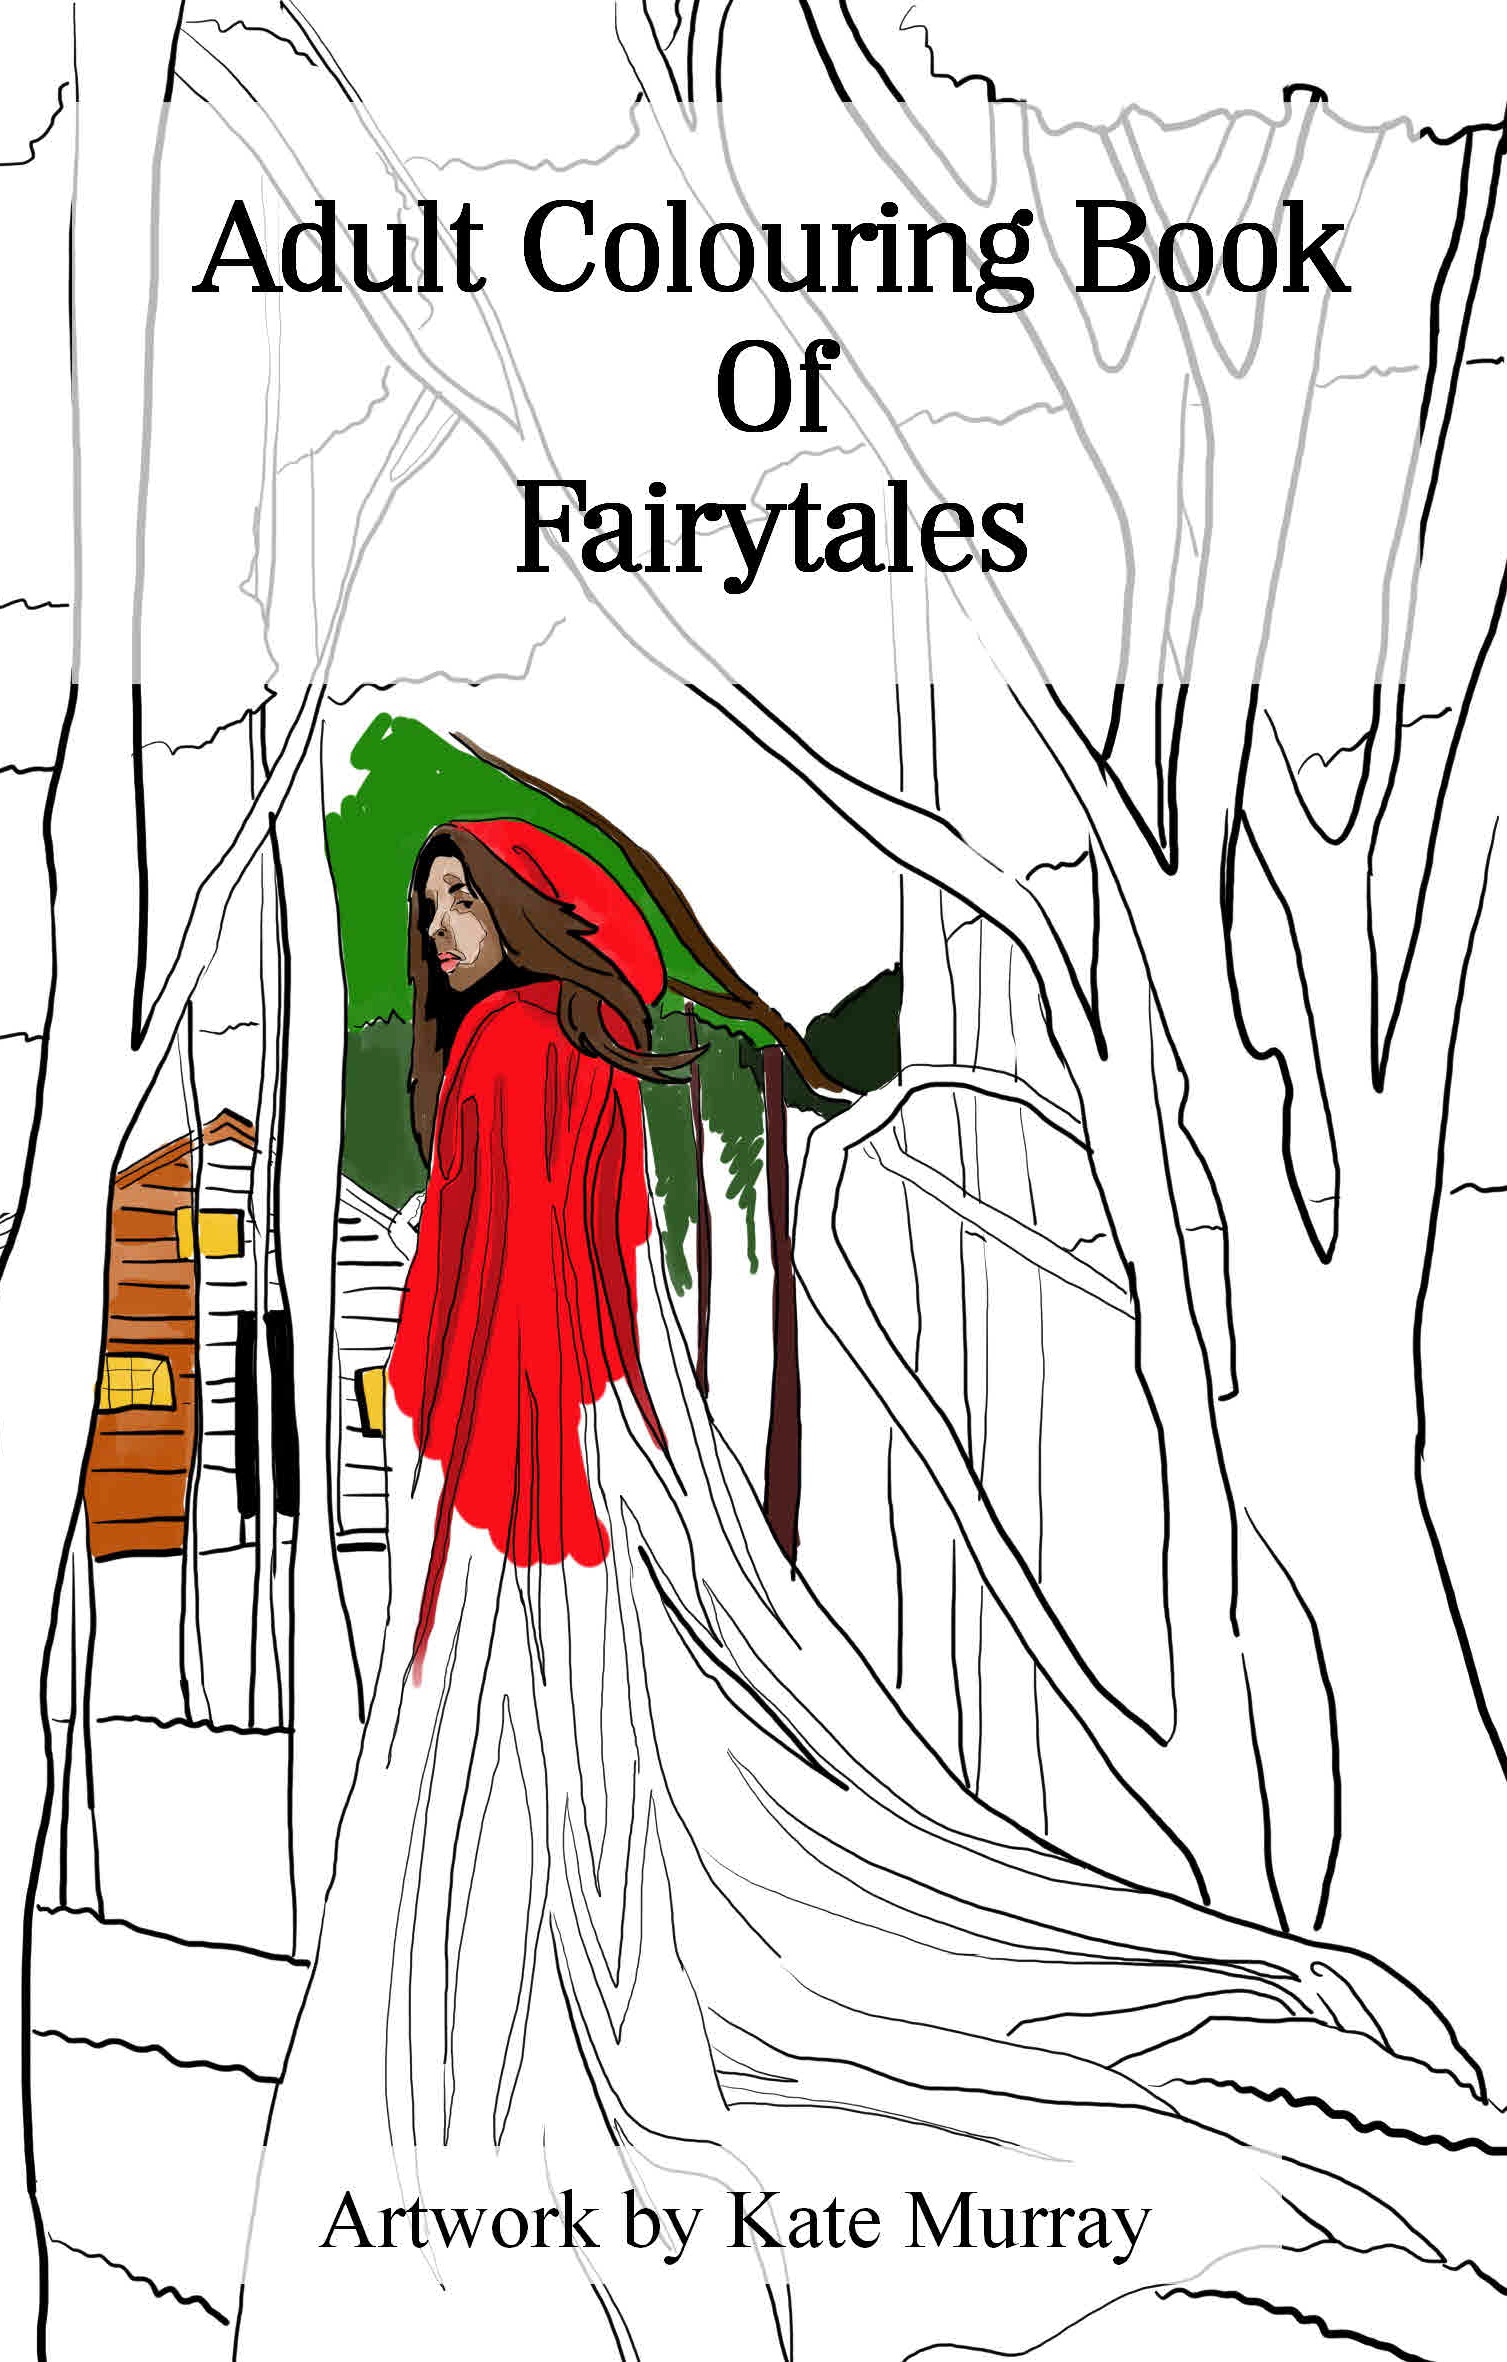 An Adult Colouring Book of Fairytales